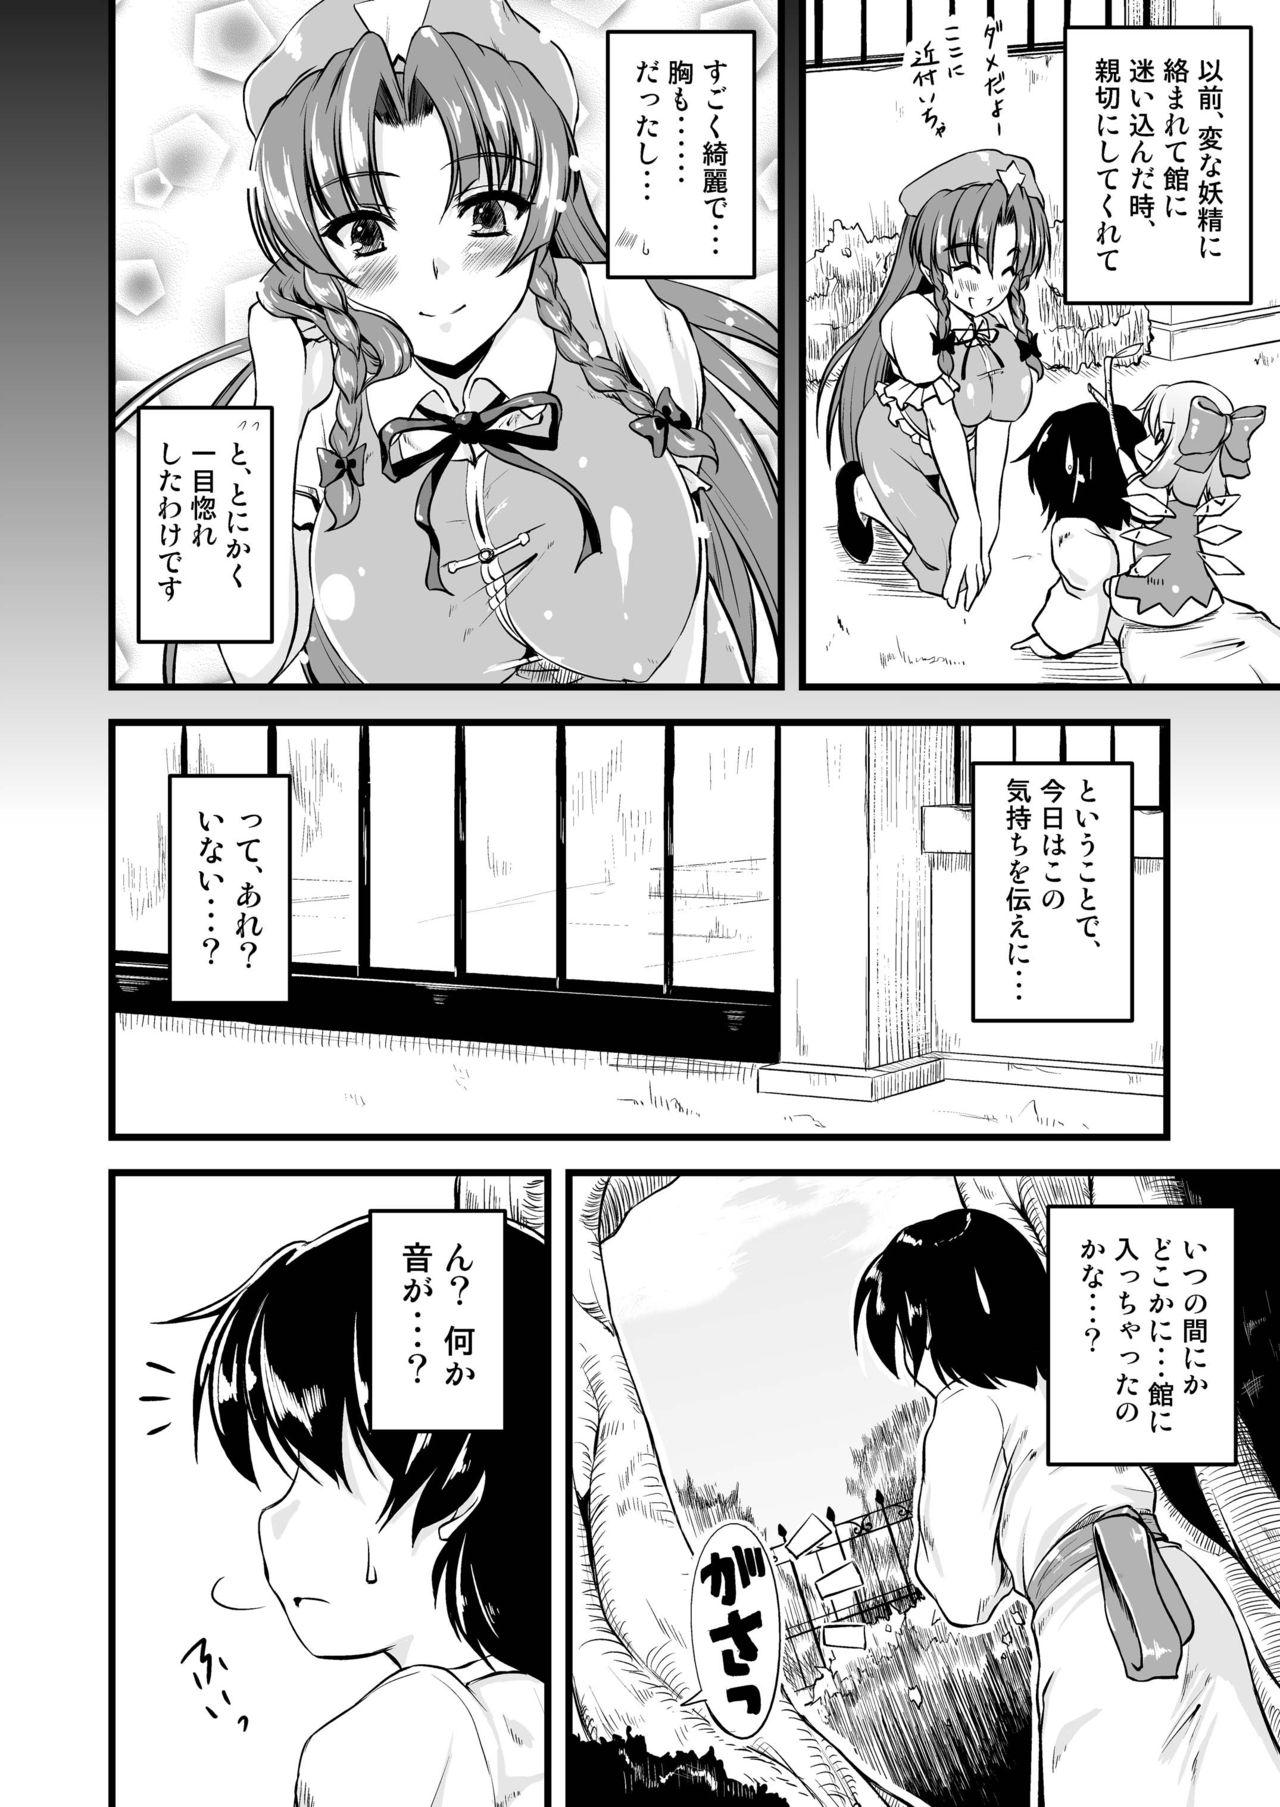 Officesex Monban no Onee-san ga Aite Shite Ageru. - Touhou project Yanks Featured - Page 3